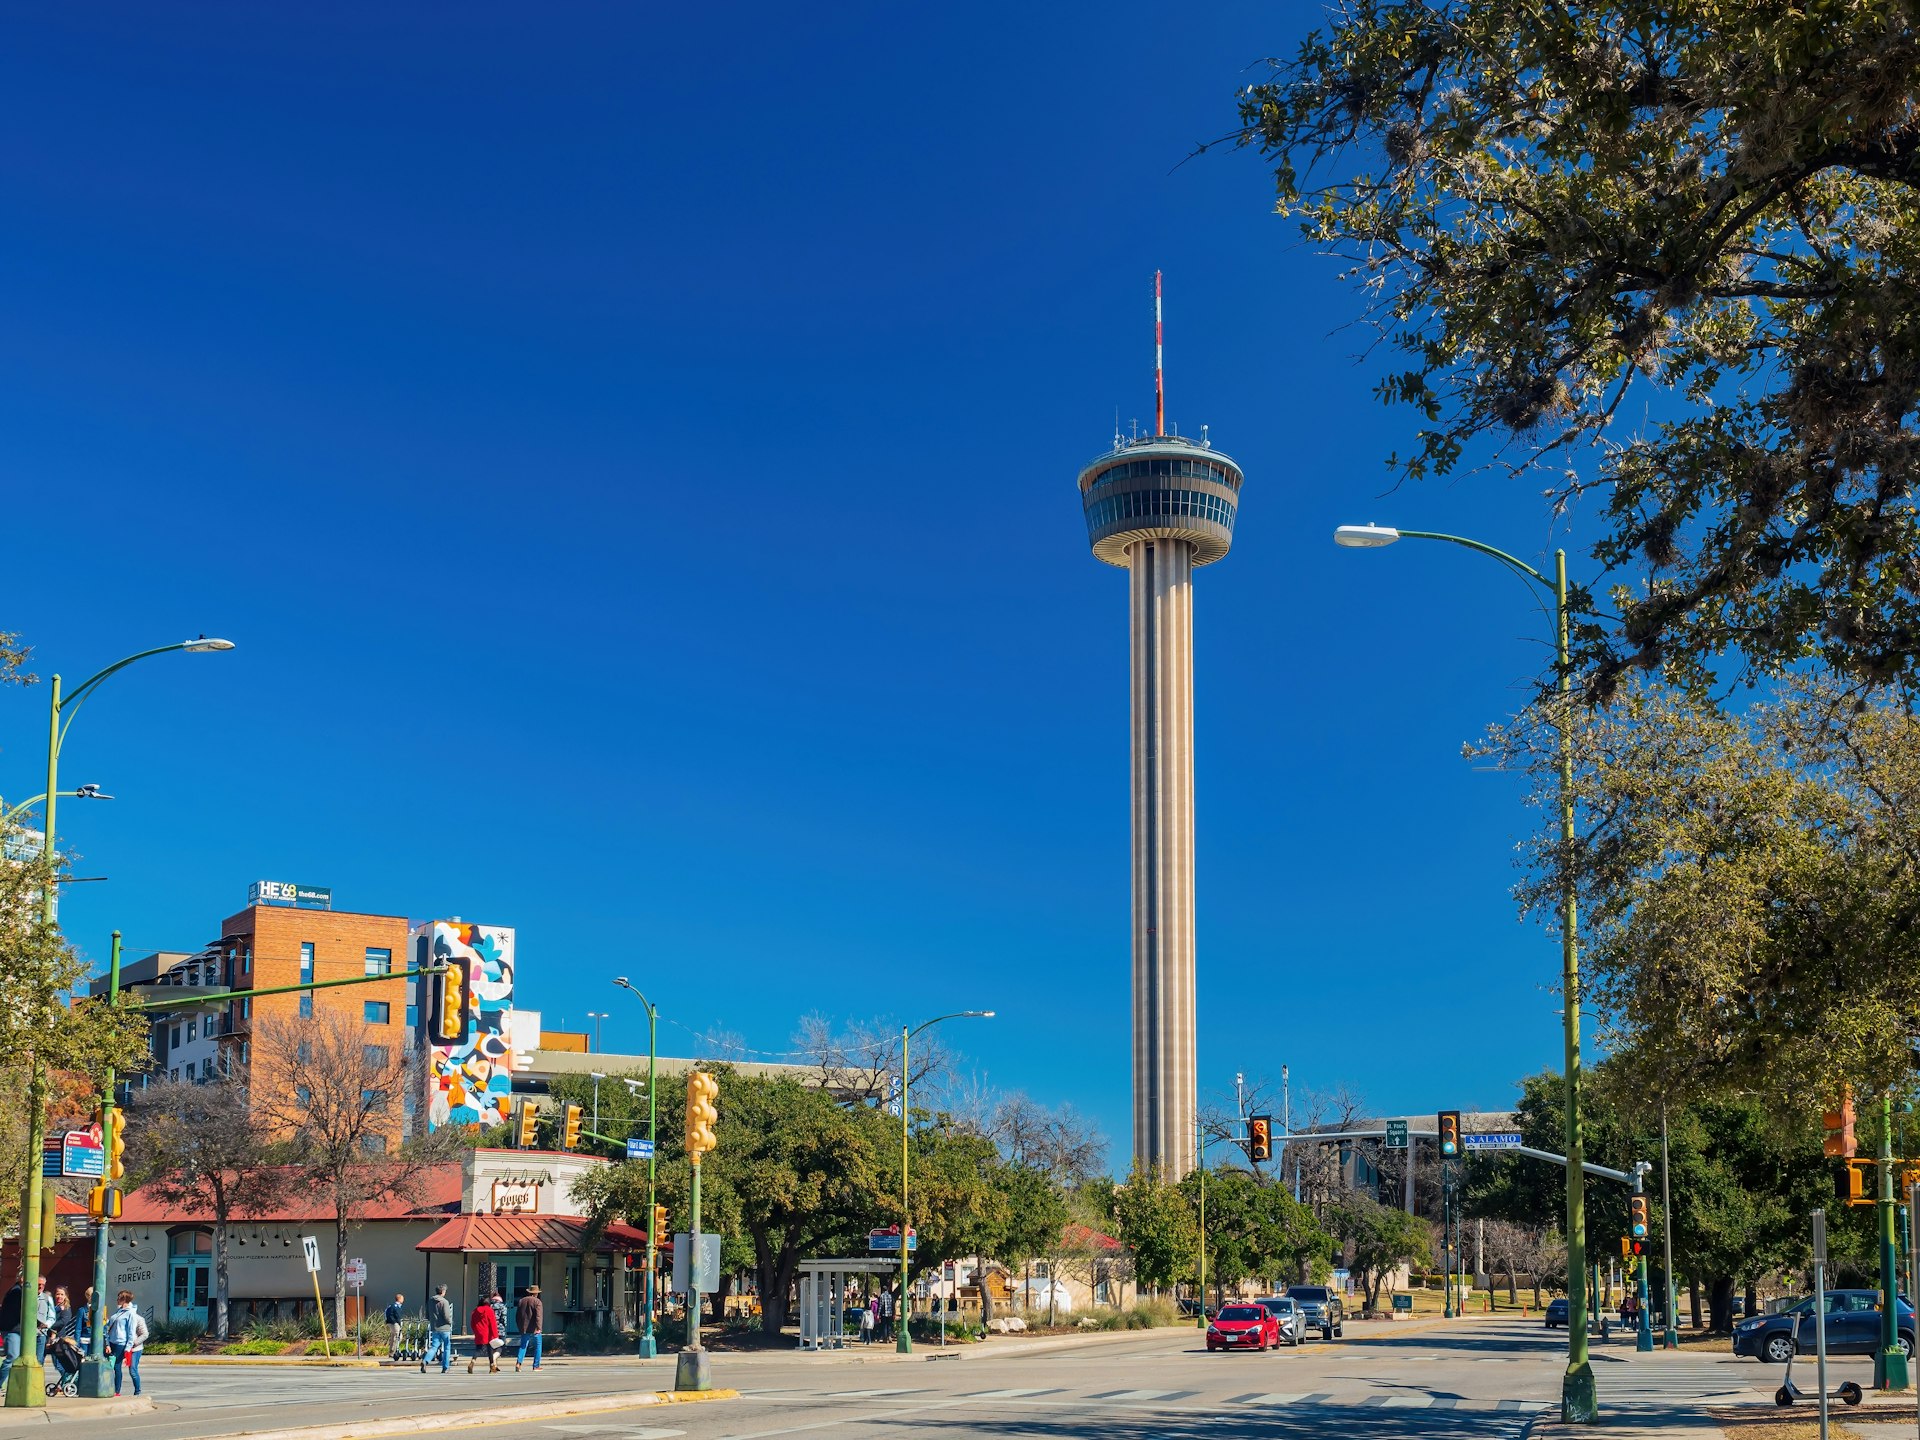 Sunny view of people walking and driving on a street in San Antonio, with the Tower of the Americas in the background 